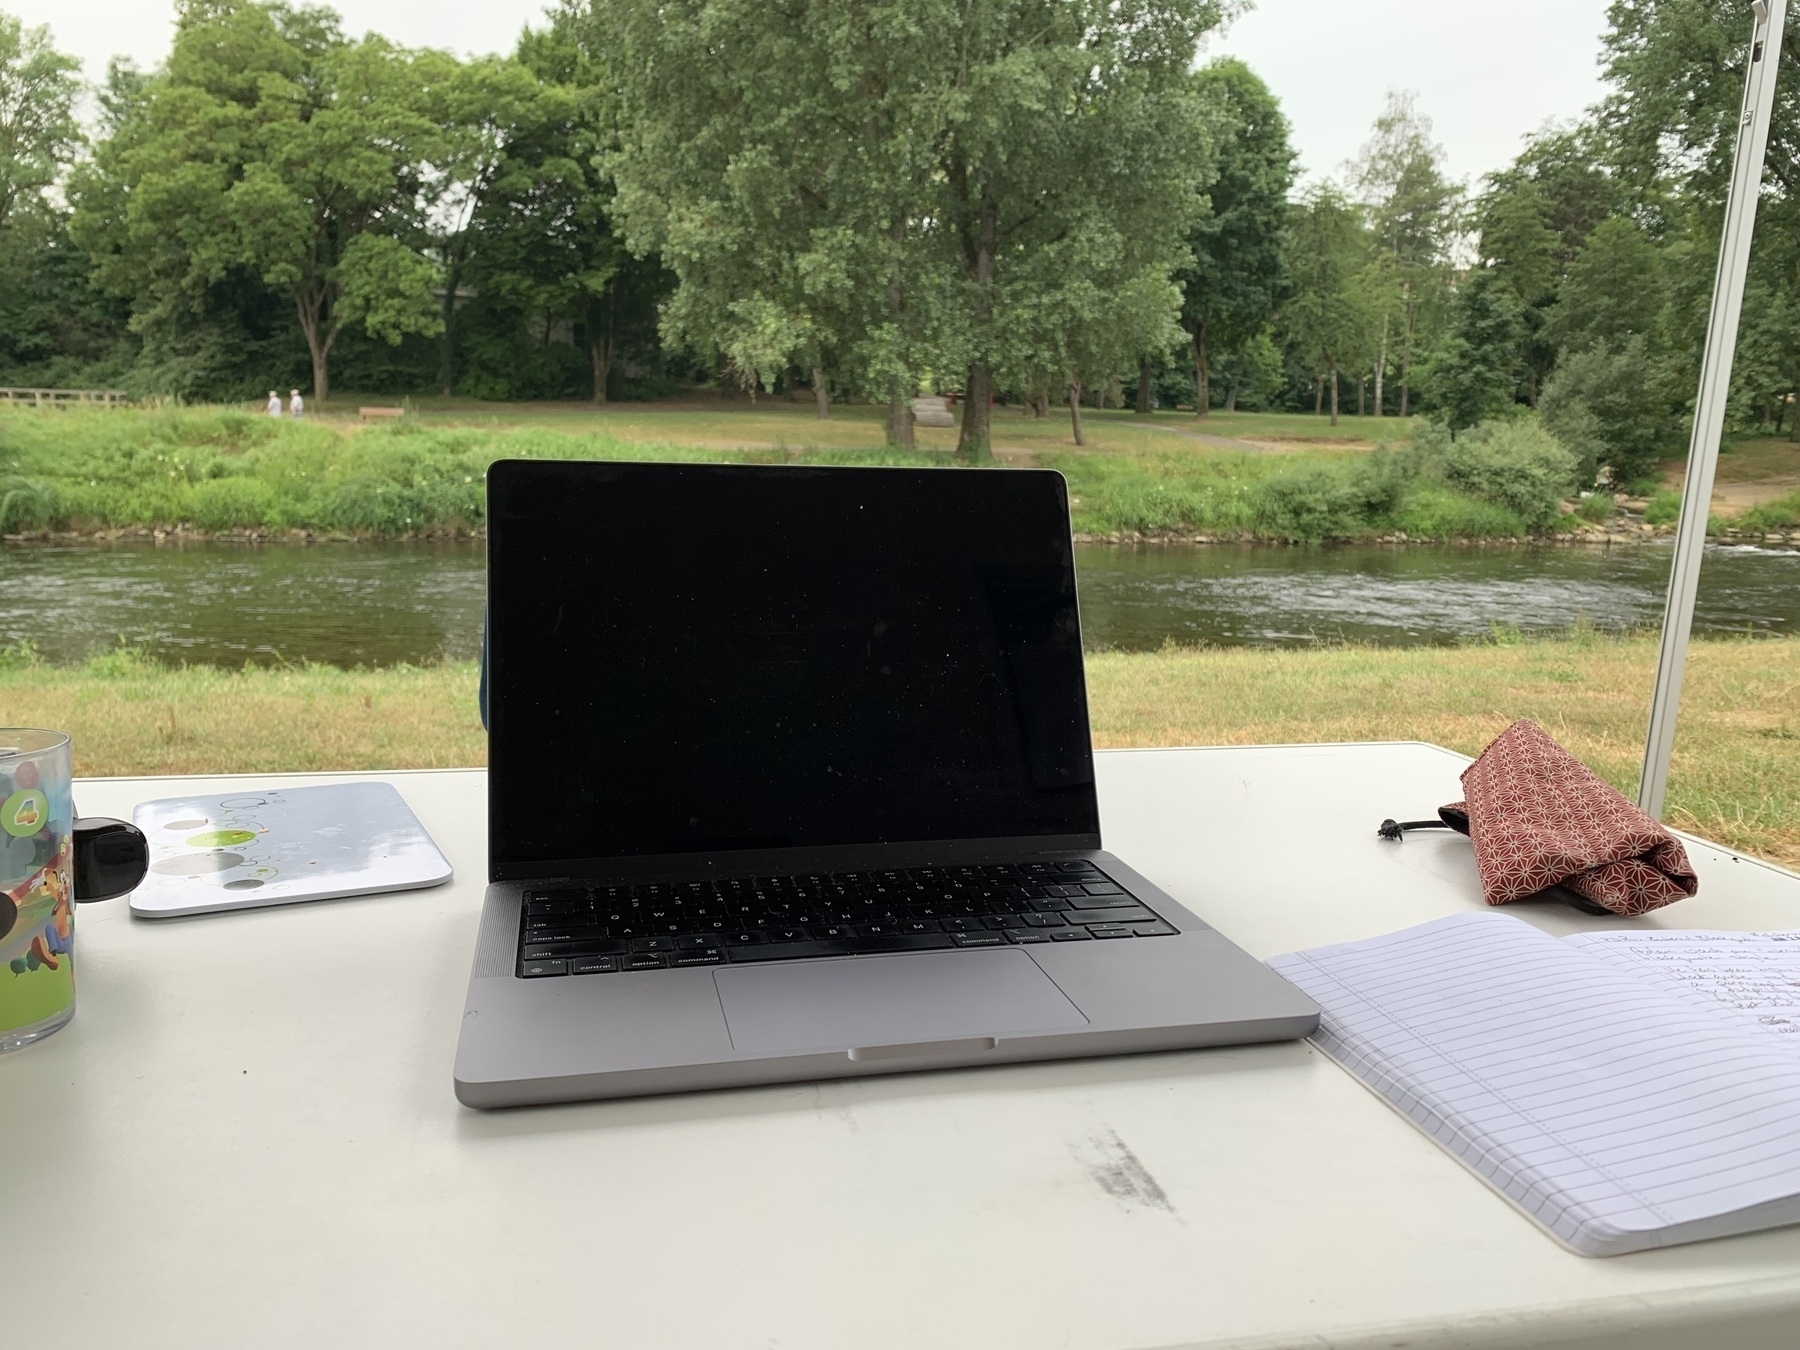 Laptop computer and notebook on table with river and park with trees in background